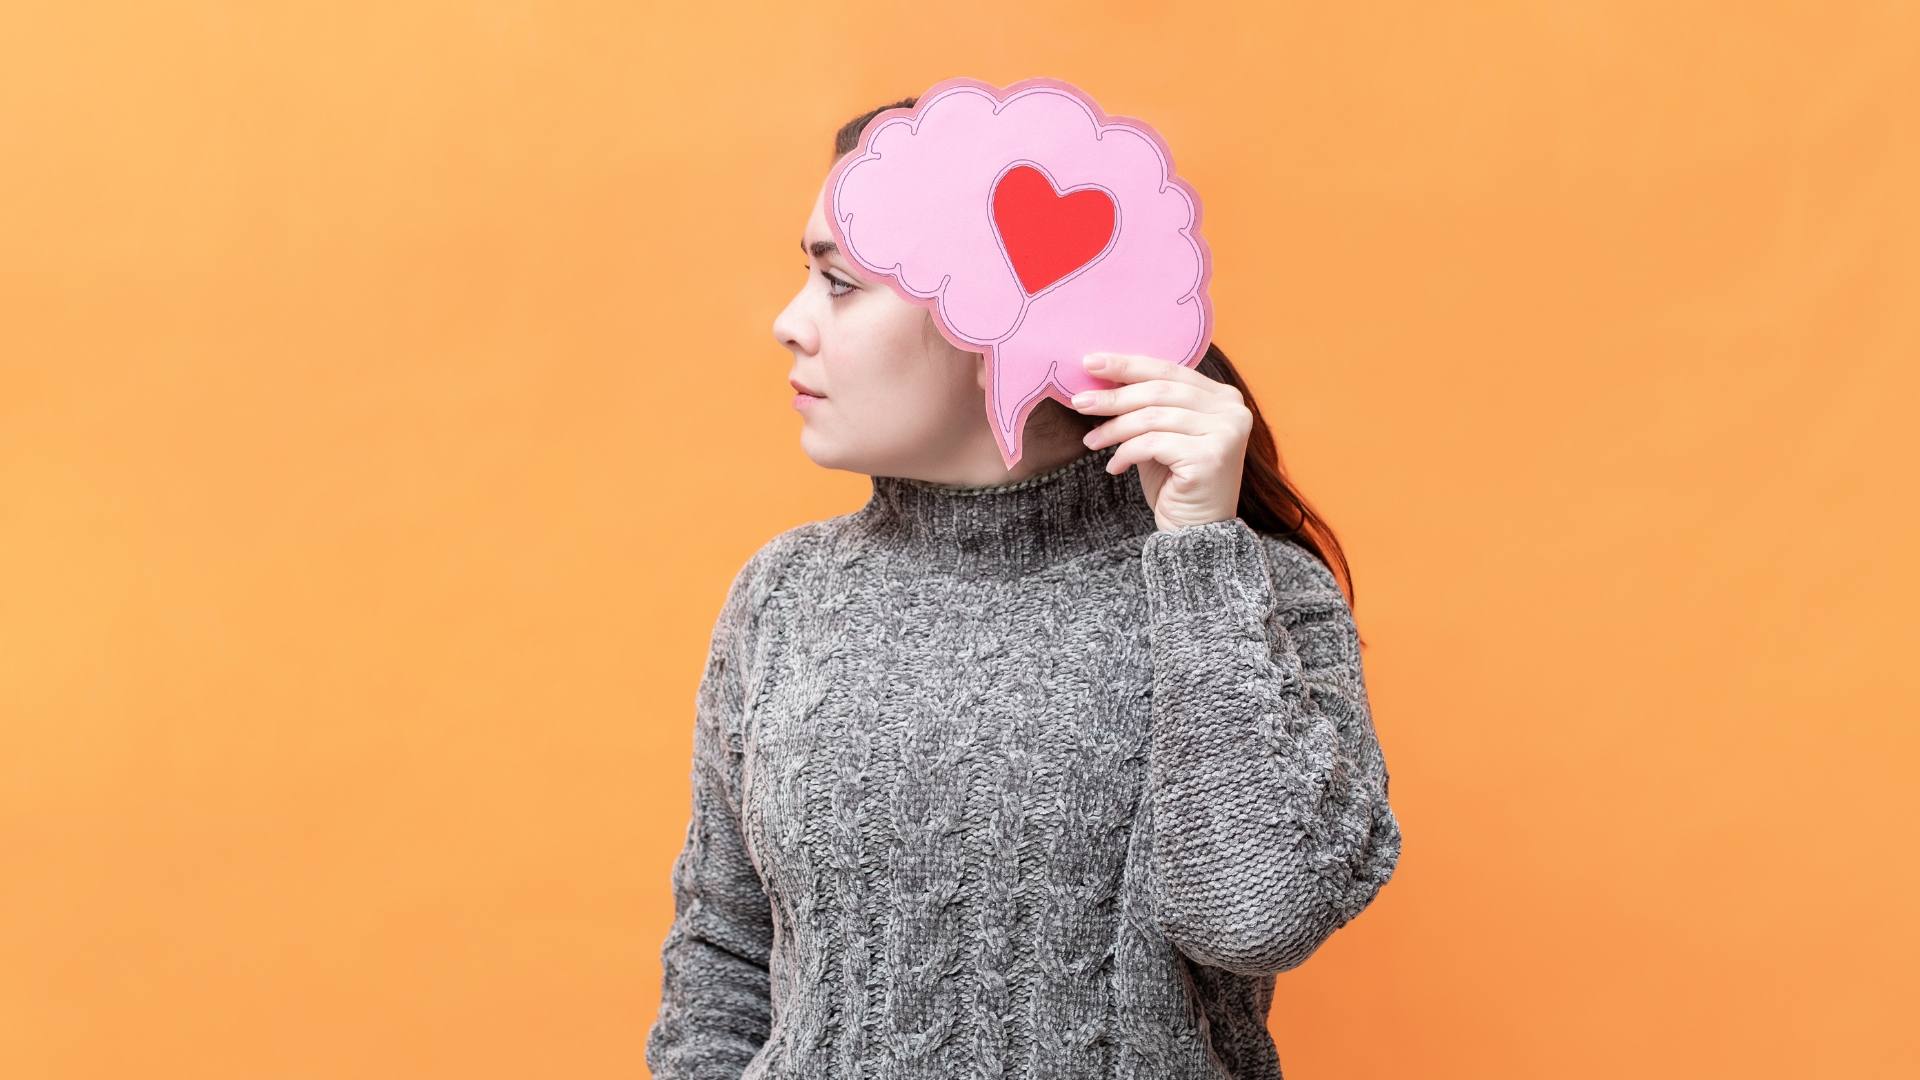 A woman holding paper cutout of brain with heart symbol on it denoting emotional intelligence.